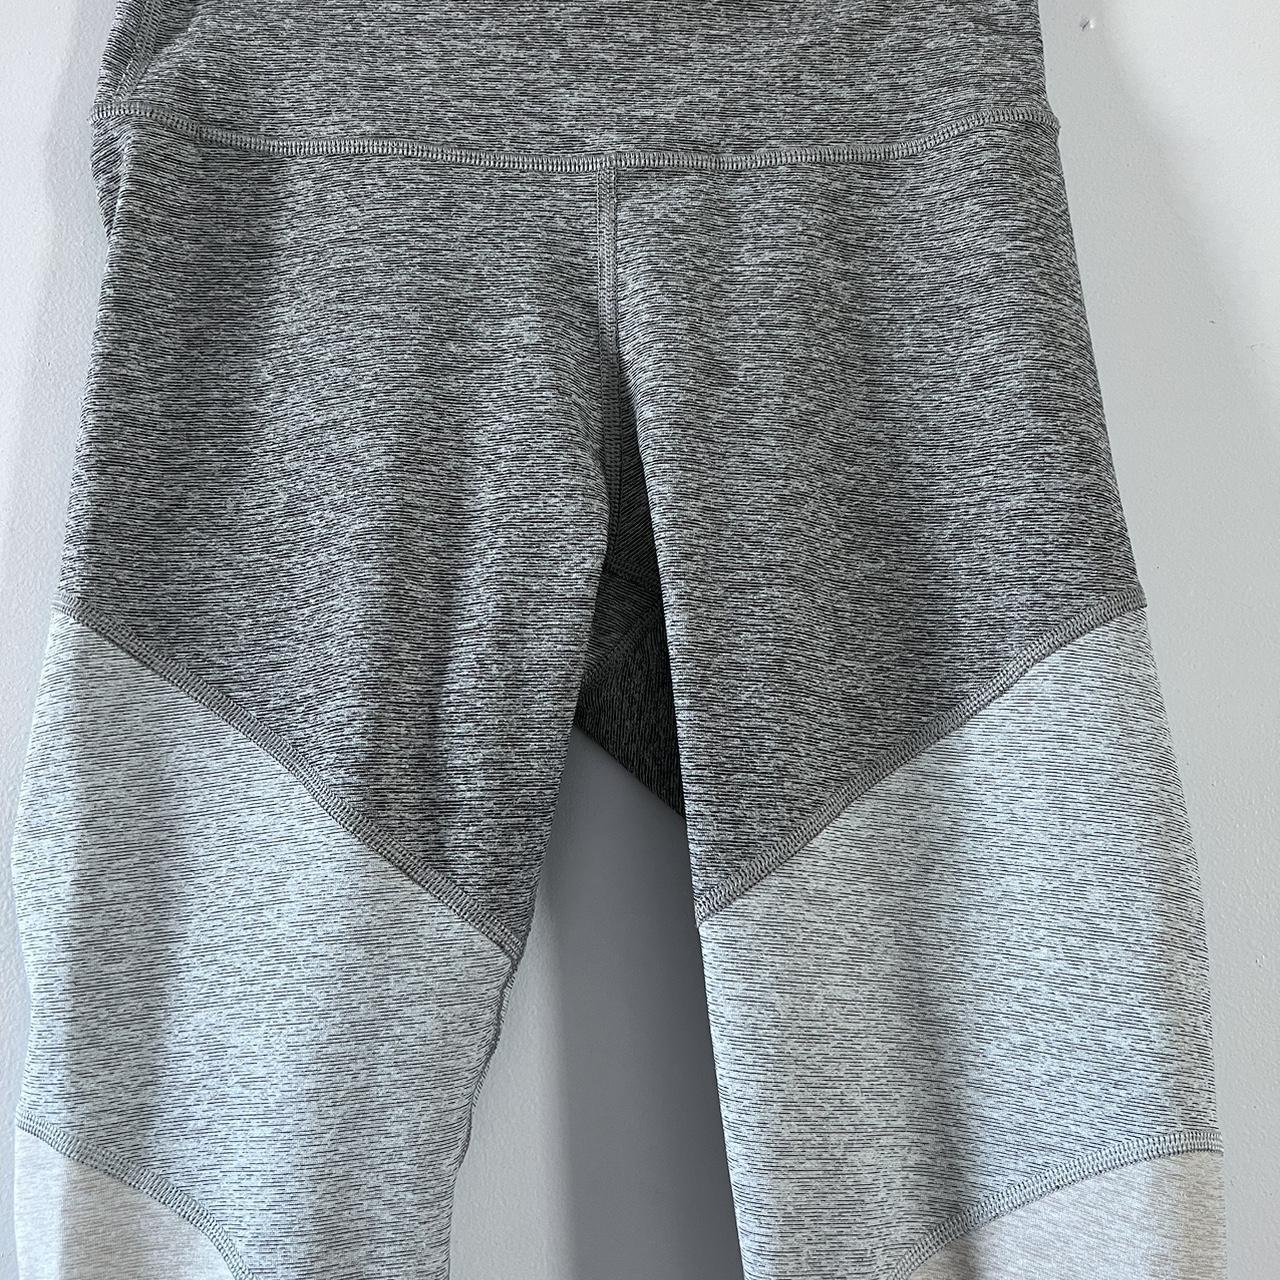 NWOT Outdoor Voices Womens Small 7/8 Colorblock Leggings Gray Yoga Run  Workout